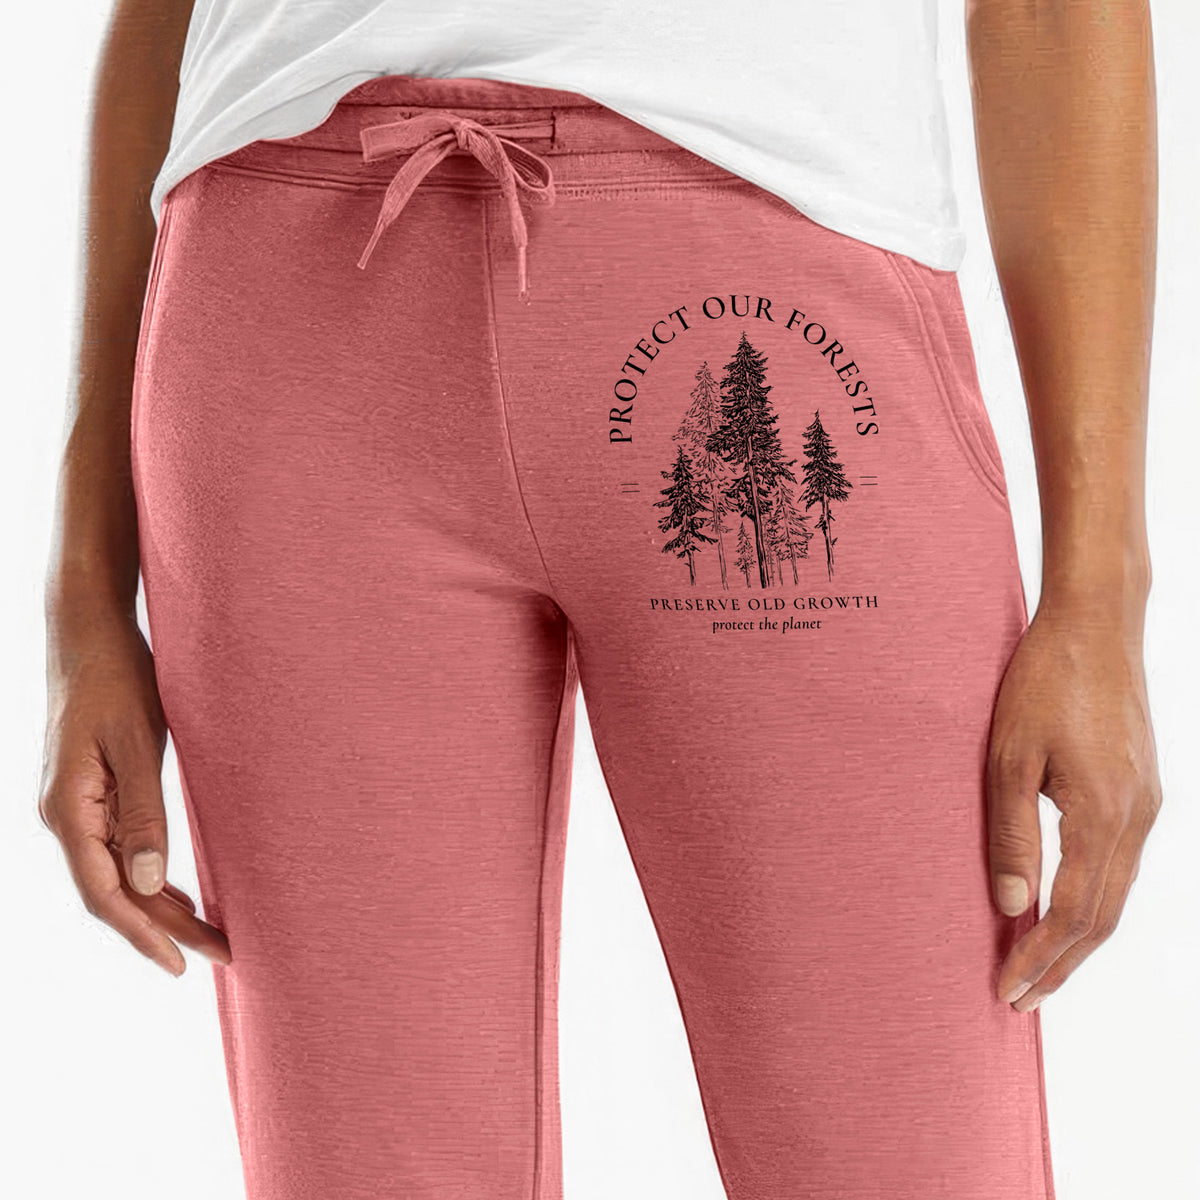 Protect our Forests - Preserve Old Growth - Women&#39;s Cali Wave Jogger Sweatpants